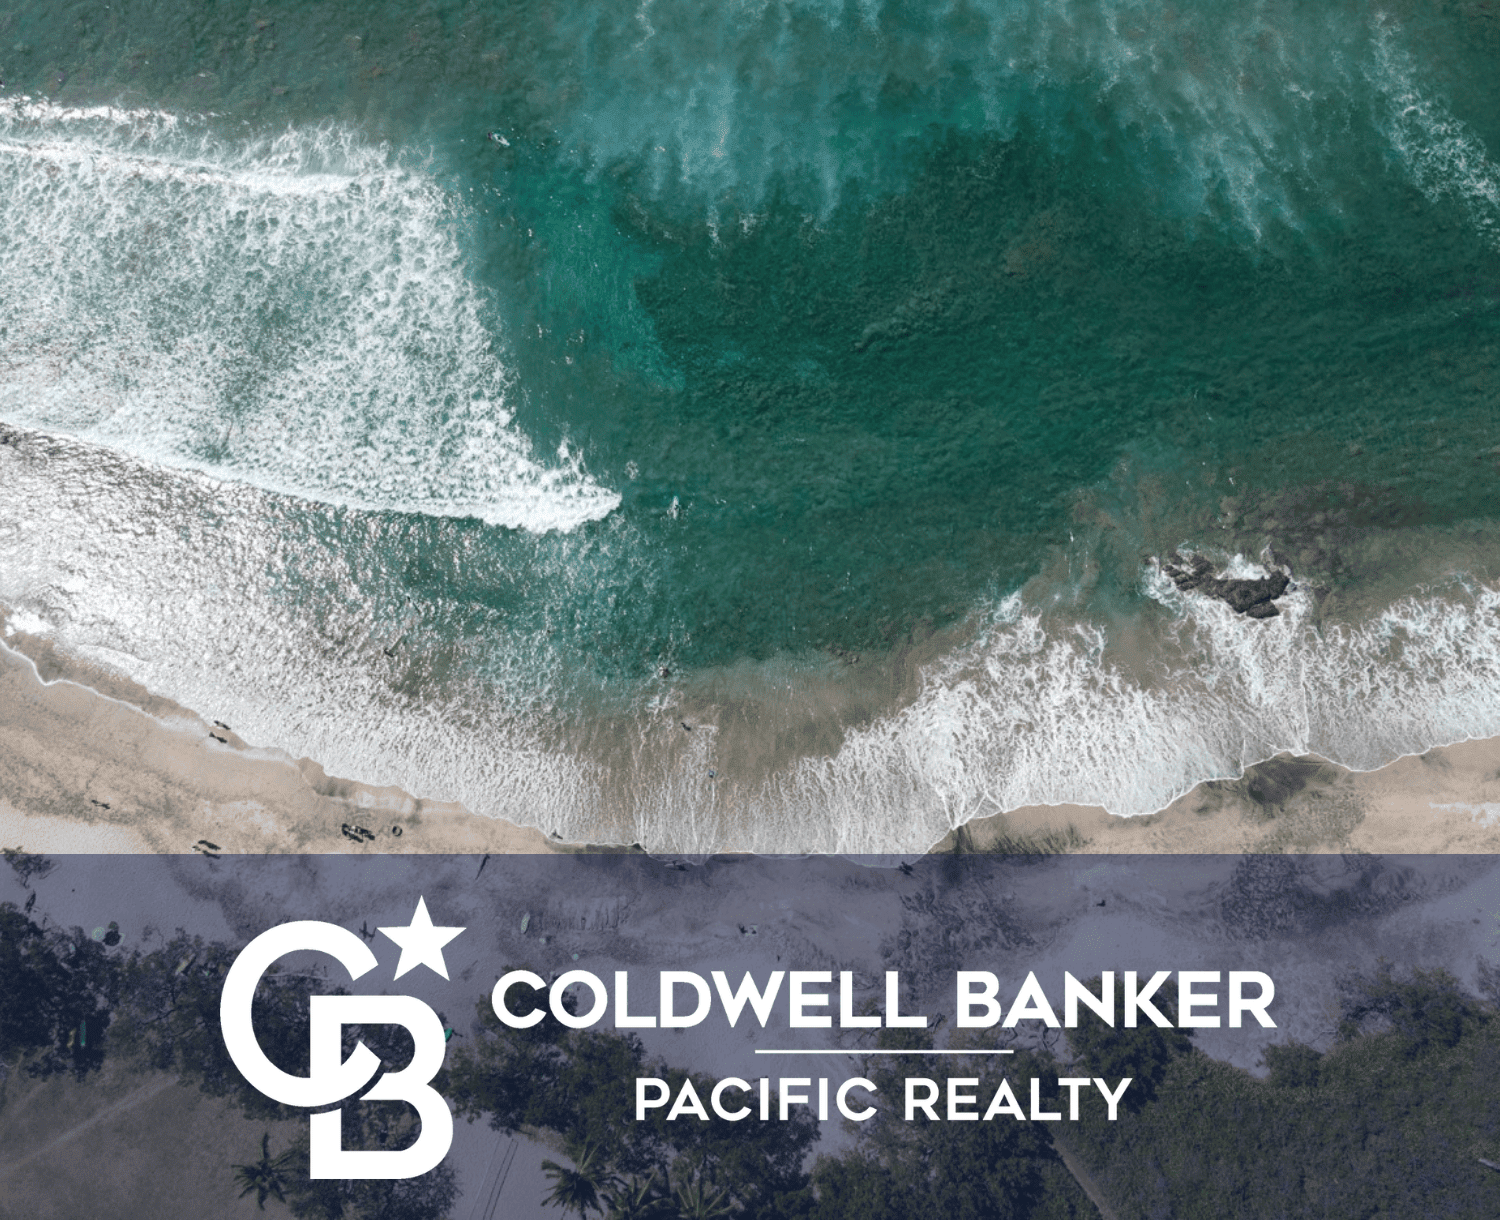 Coldwell Banker Pacific Realty